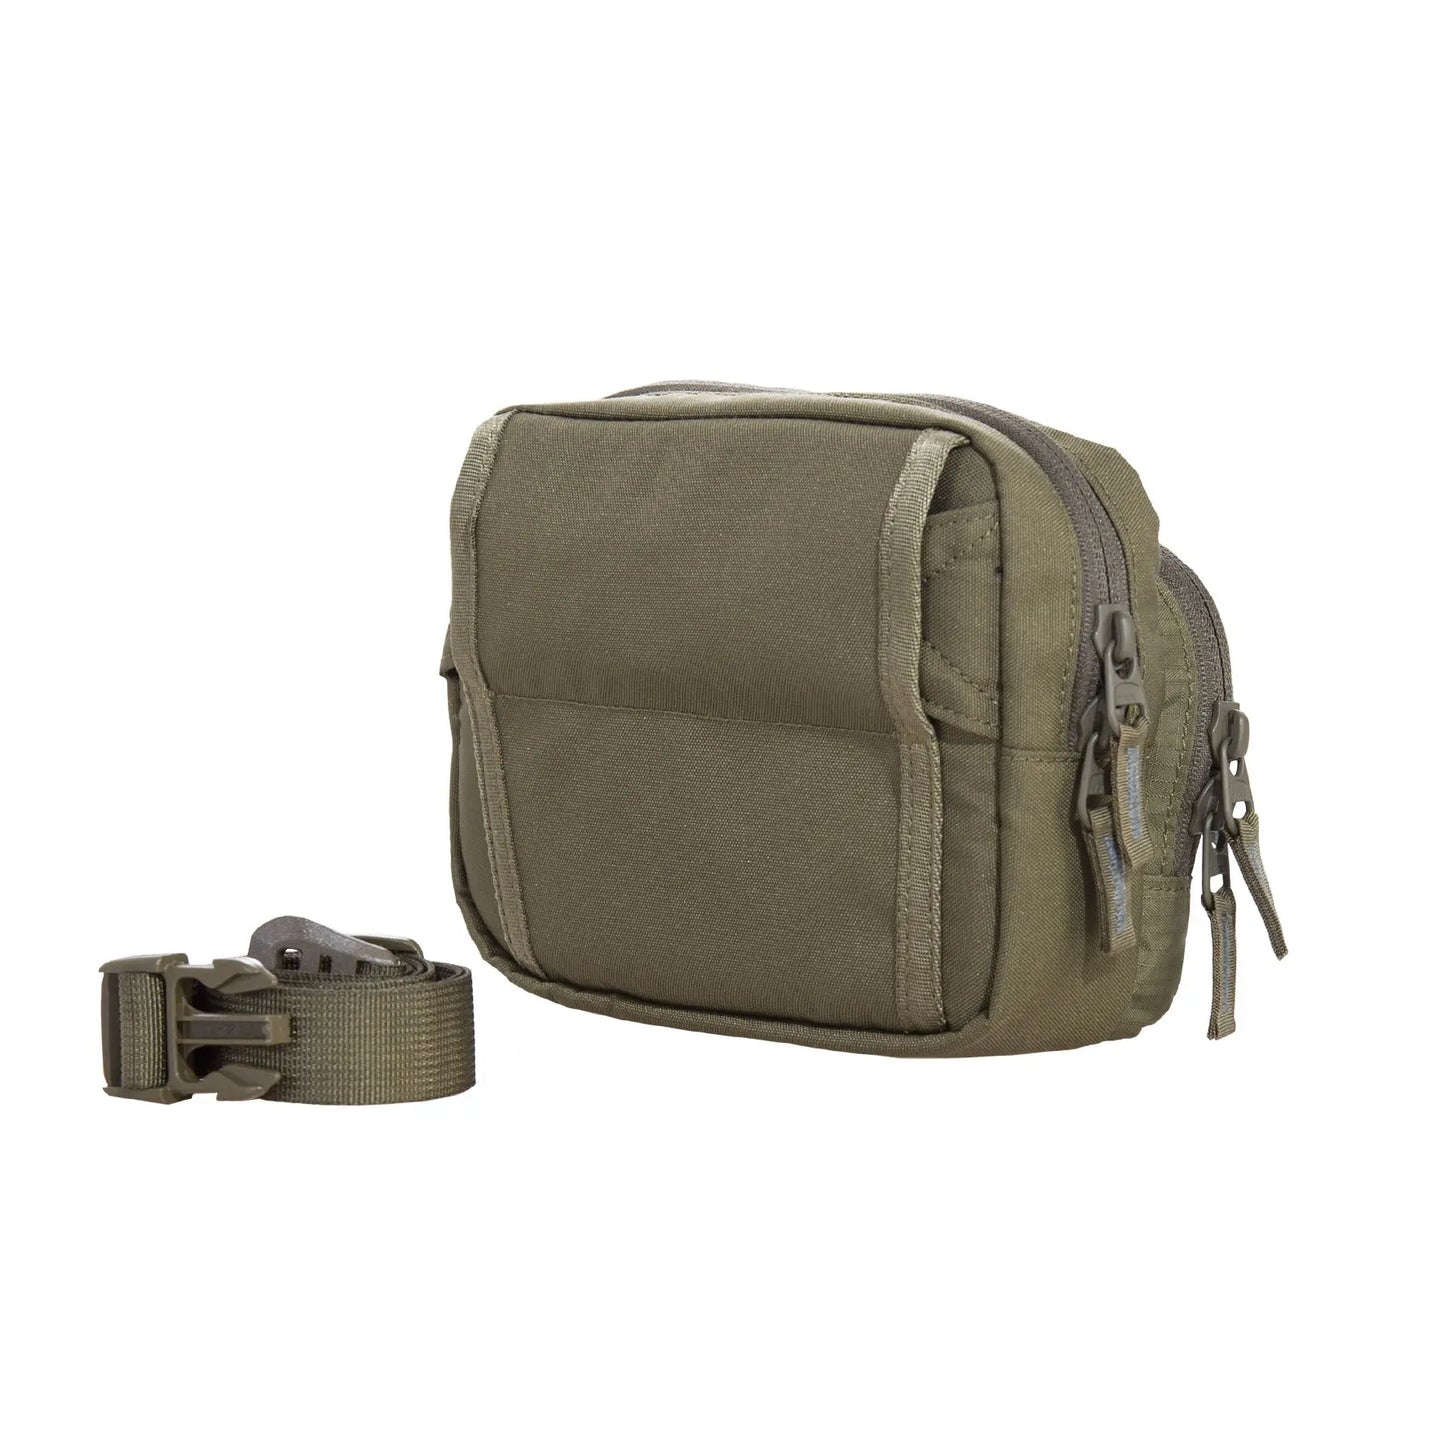 Protean Pouch NSO Gear